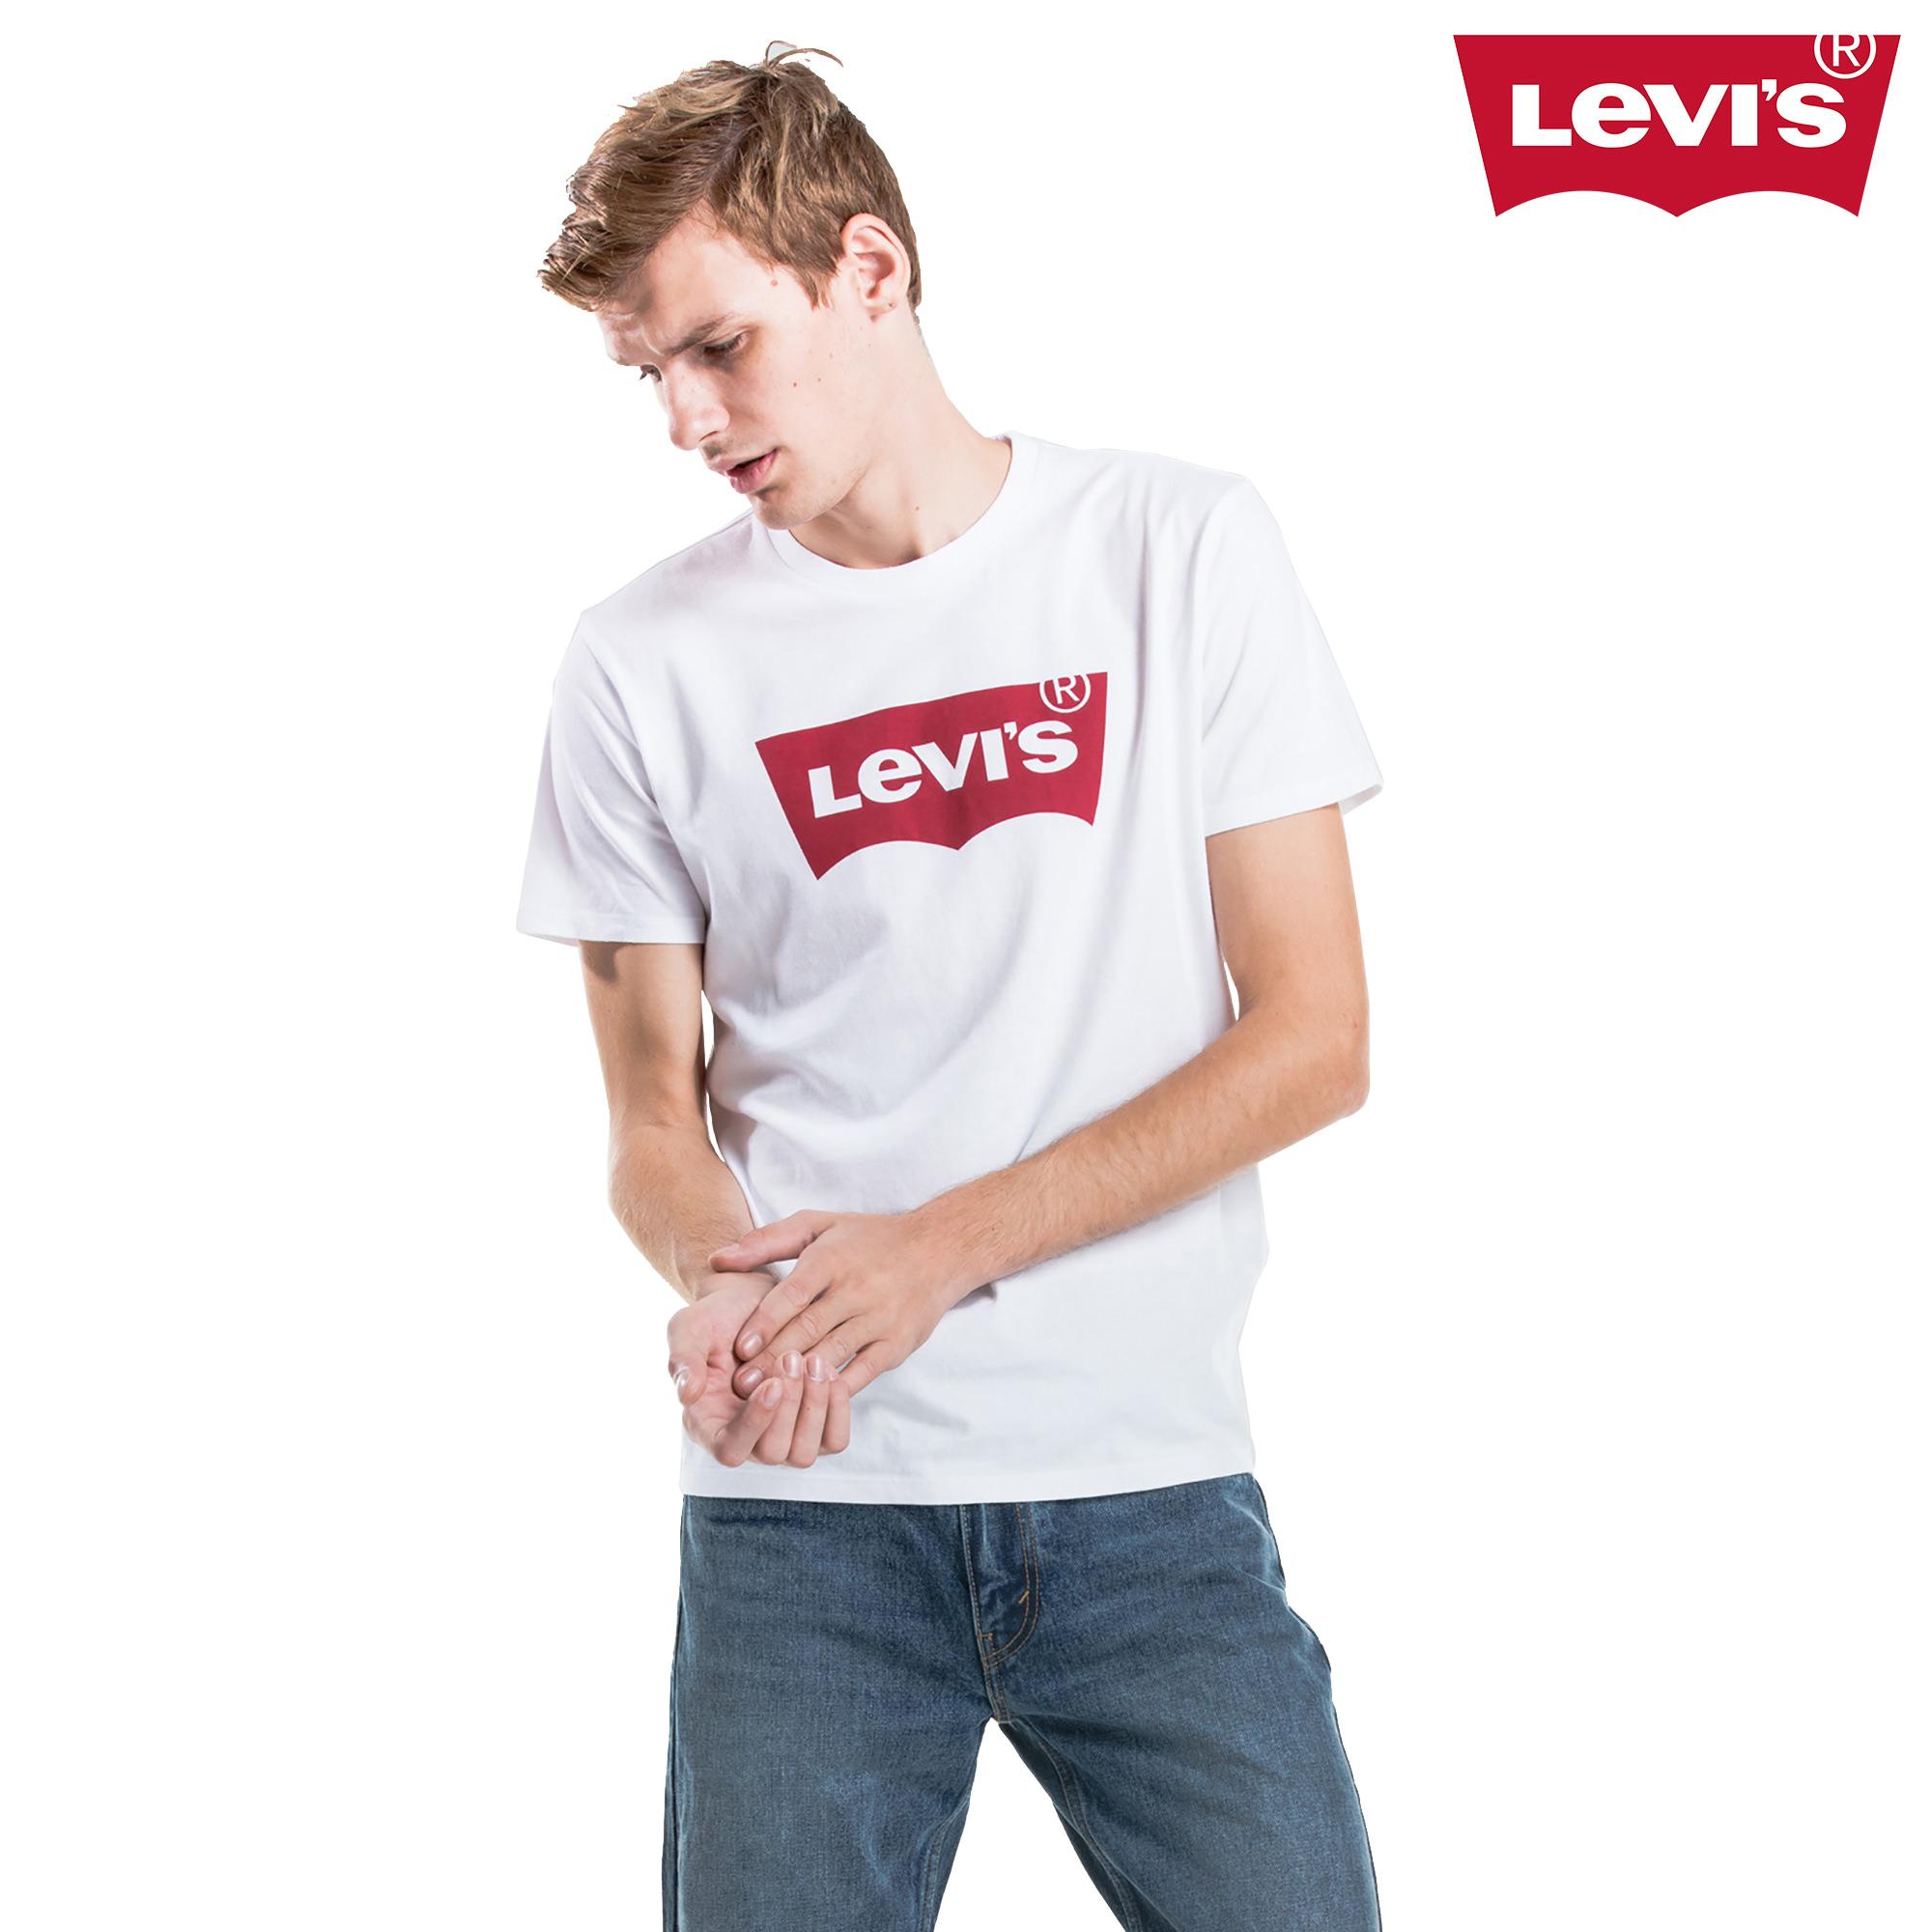 lazada levi's off 65% - online-sms.in